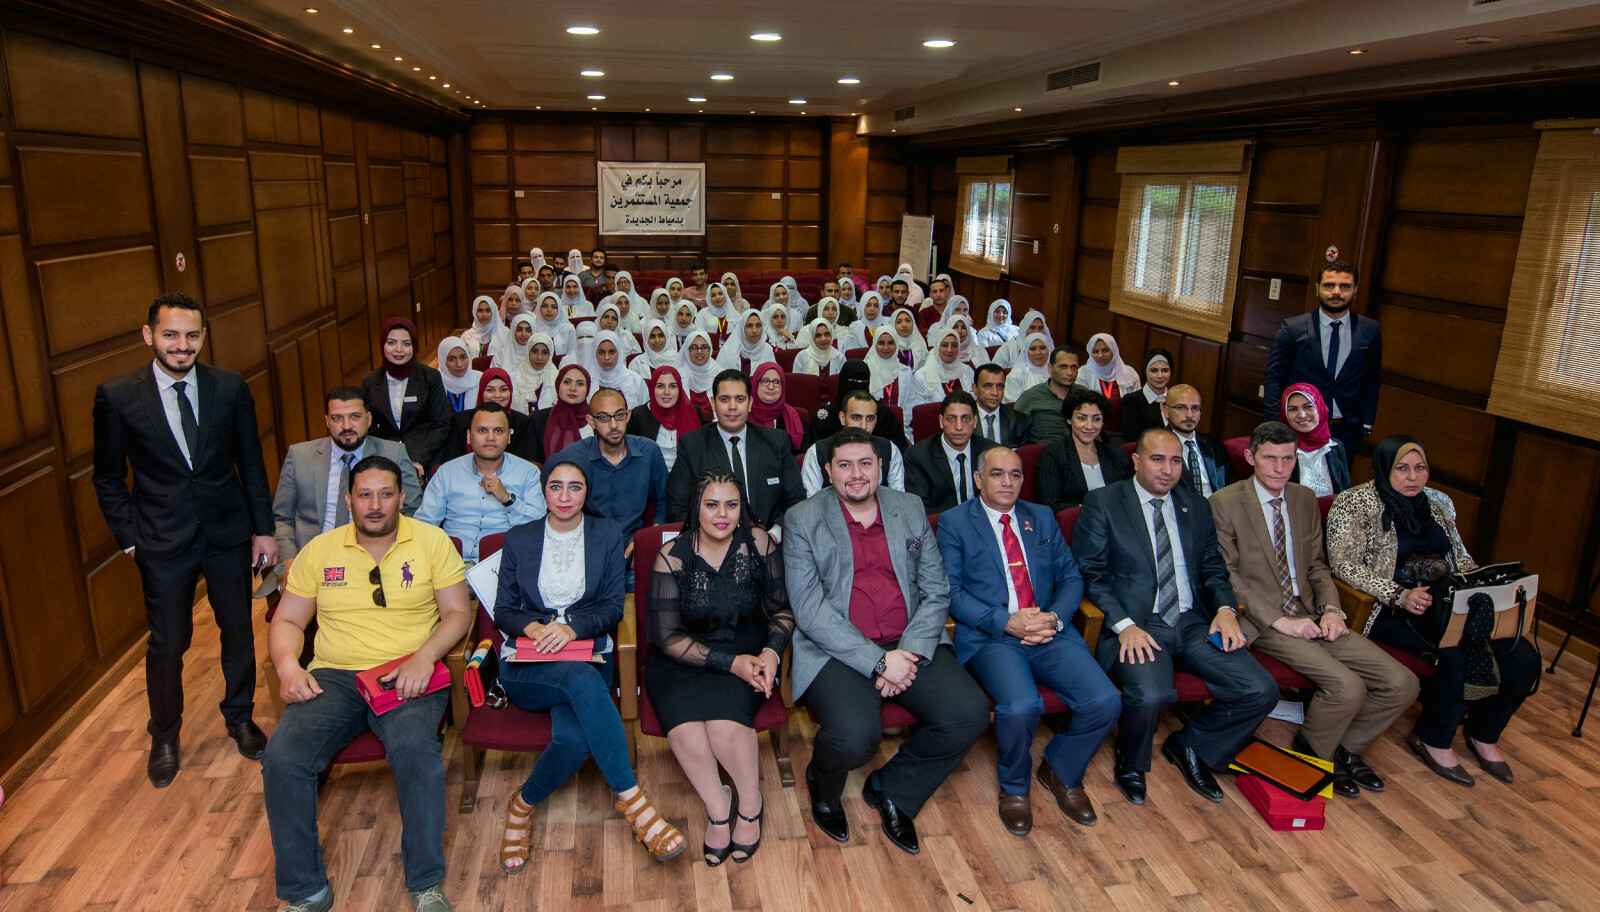 In the front row, in front of staff and students at Horus Academy, sits Aihan Jaf in a blue suit. The academy brought in its own photographer for the occasion.